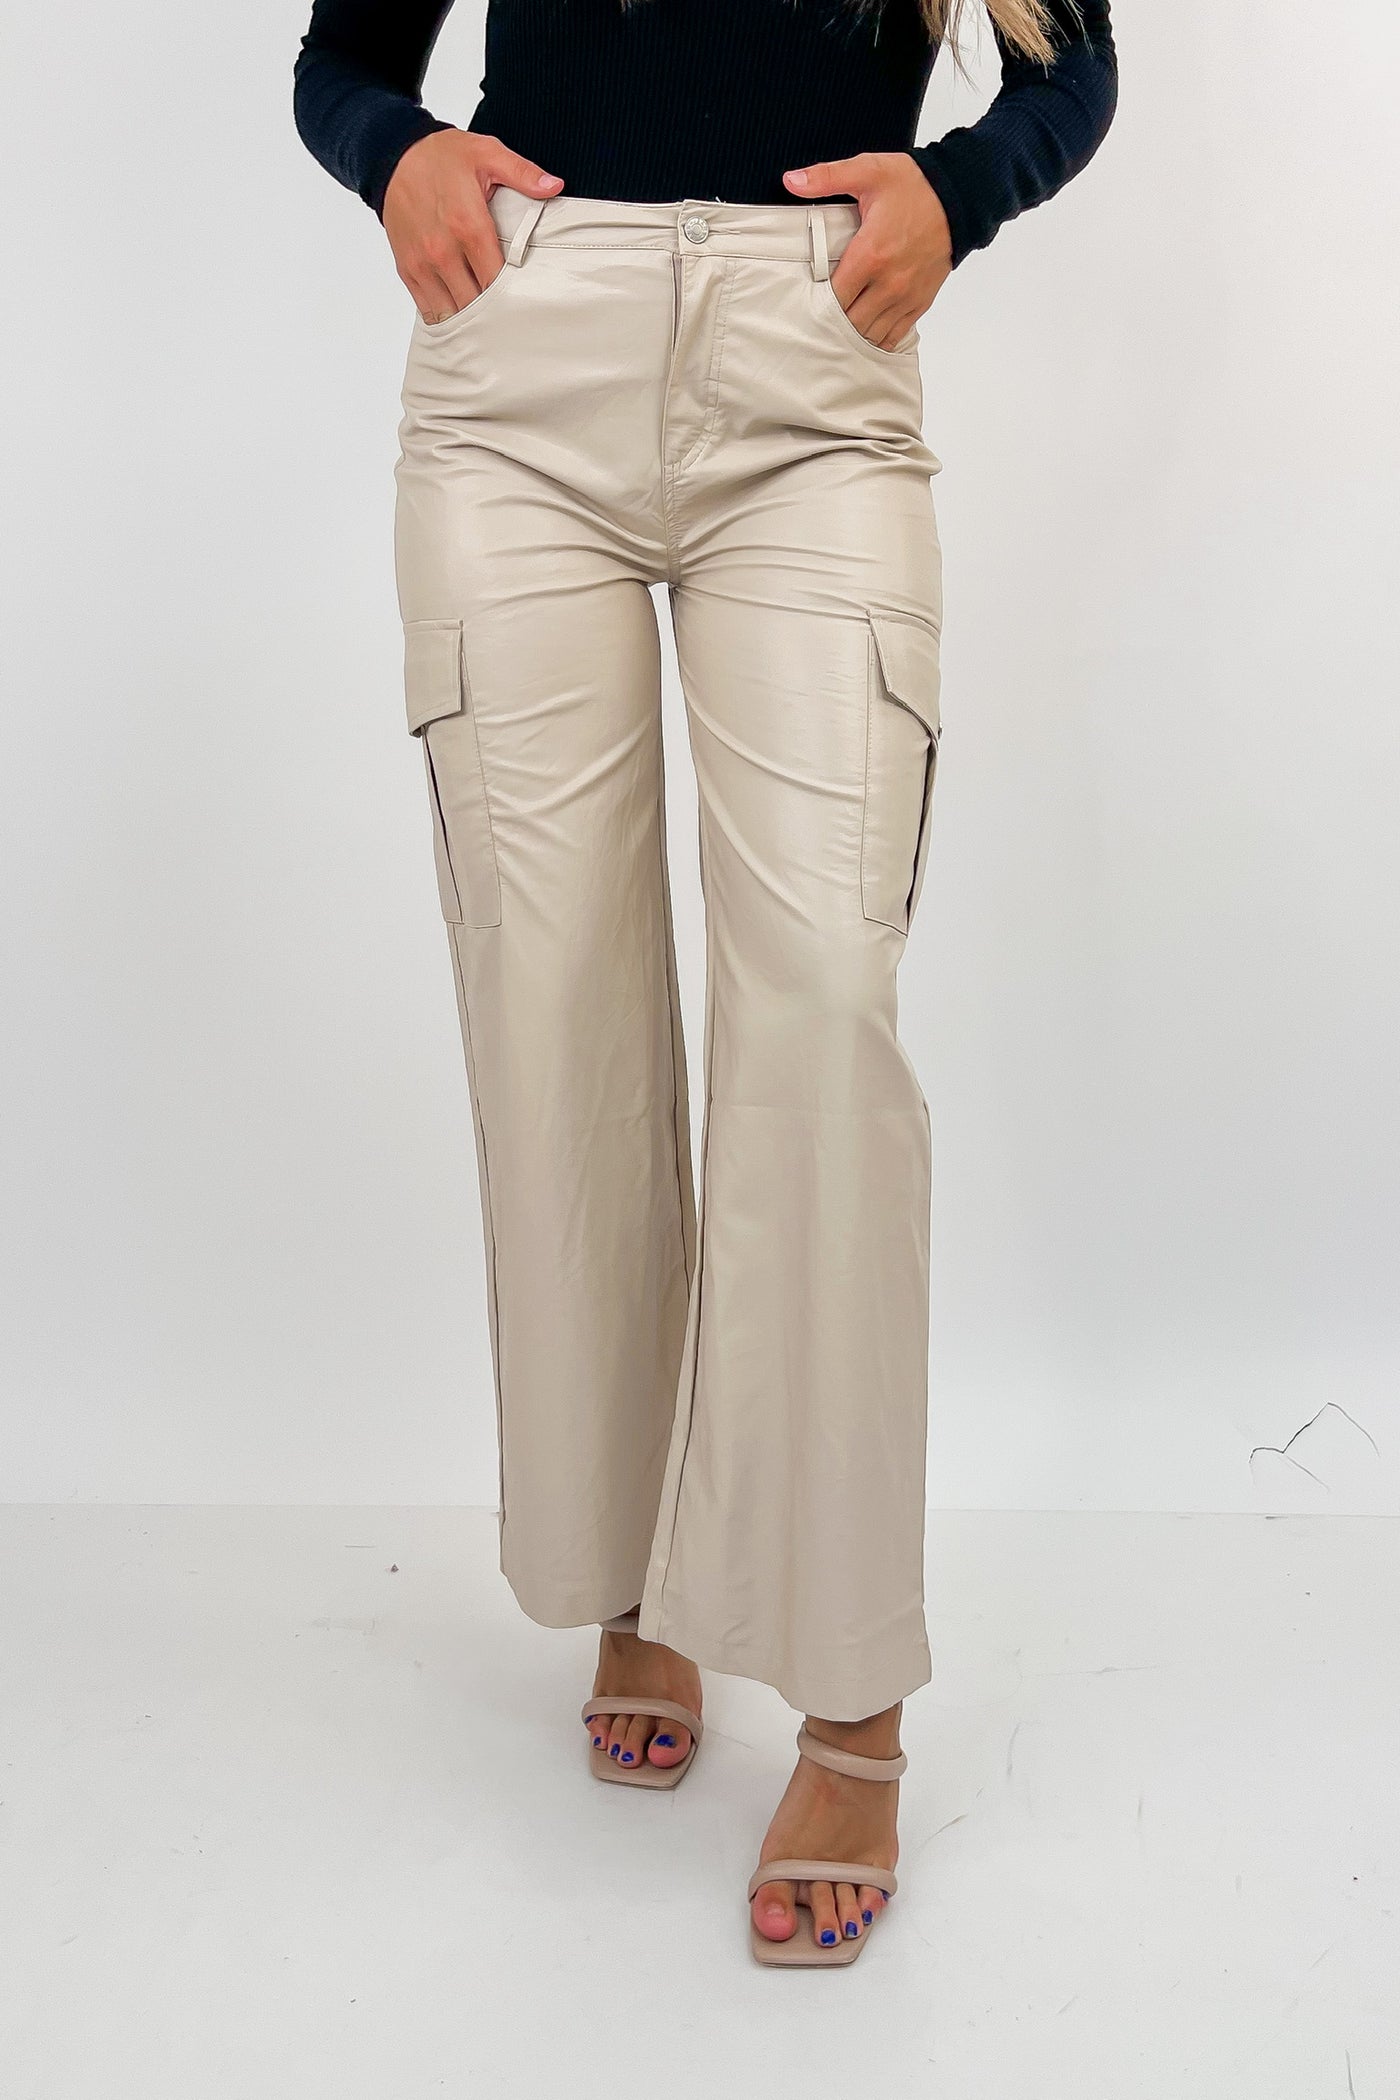 Savvy Outlook Cargo Pant